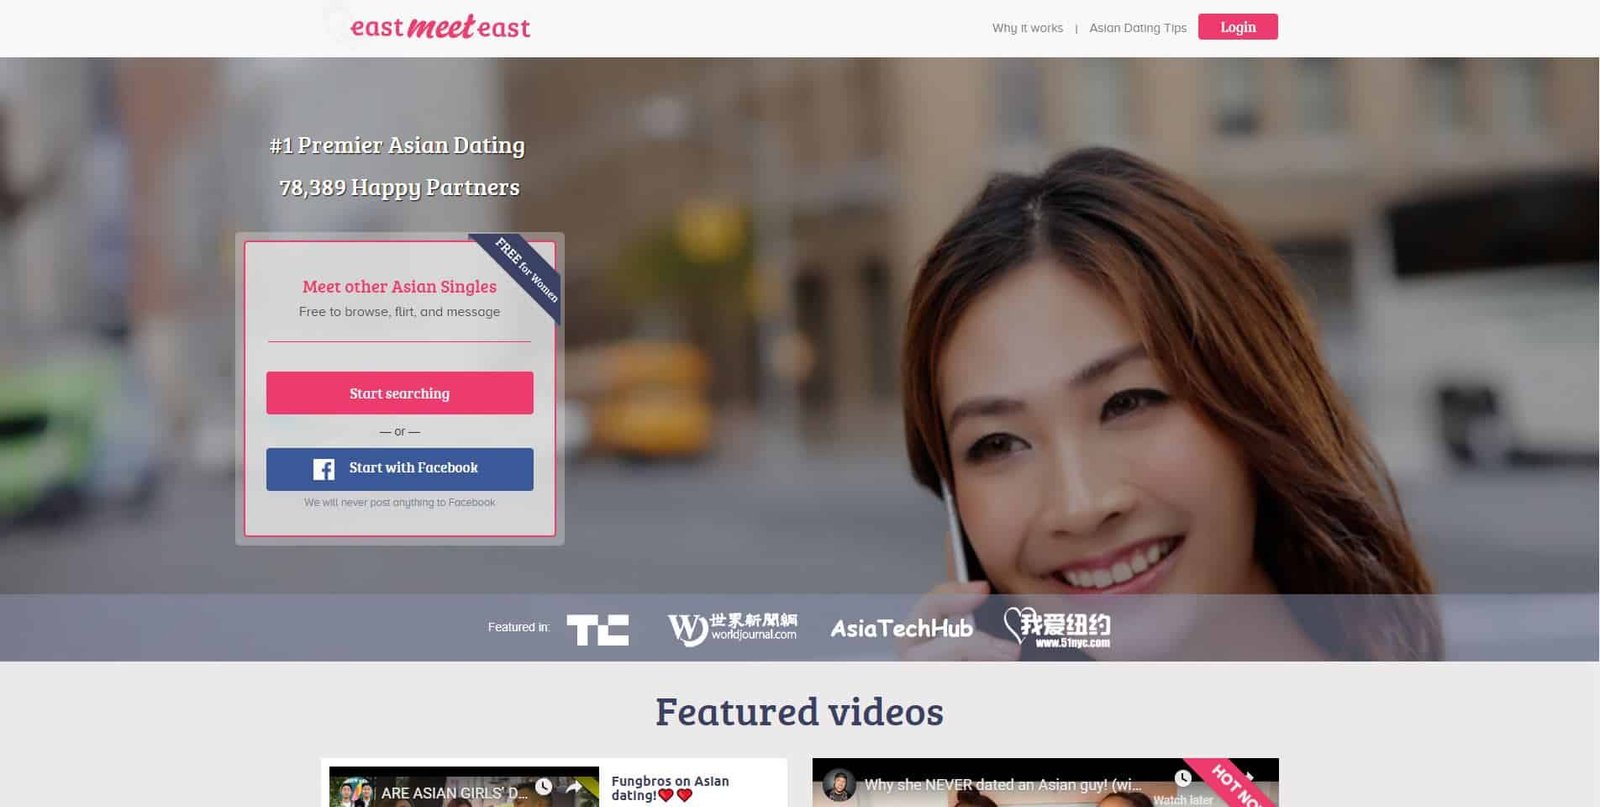 AsianDating is part of the well-established Cupid Media network that operat...